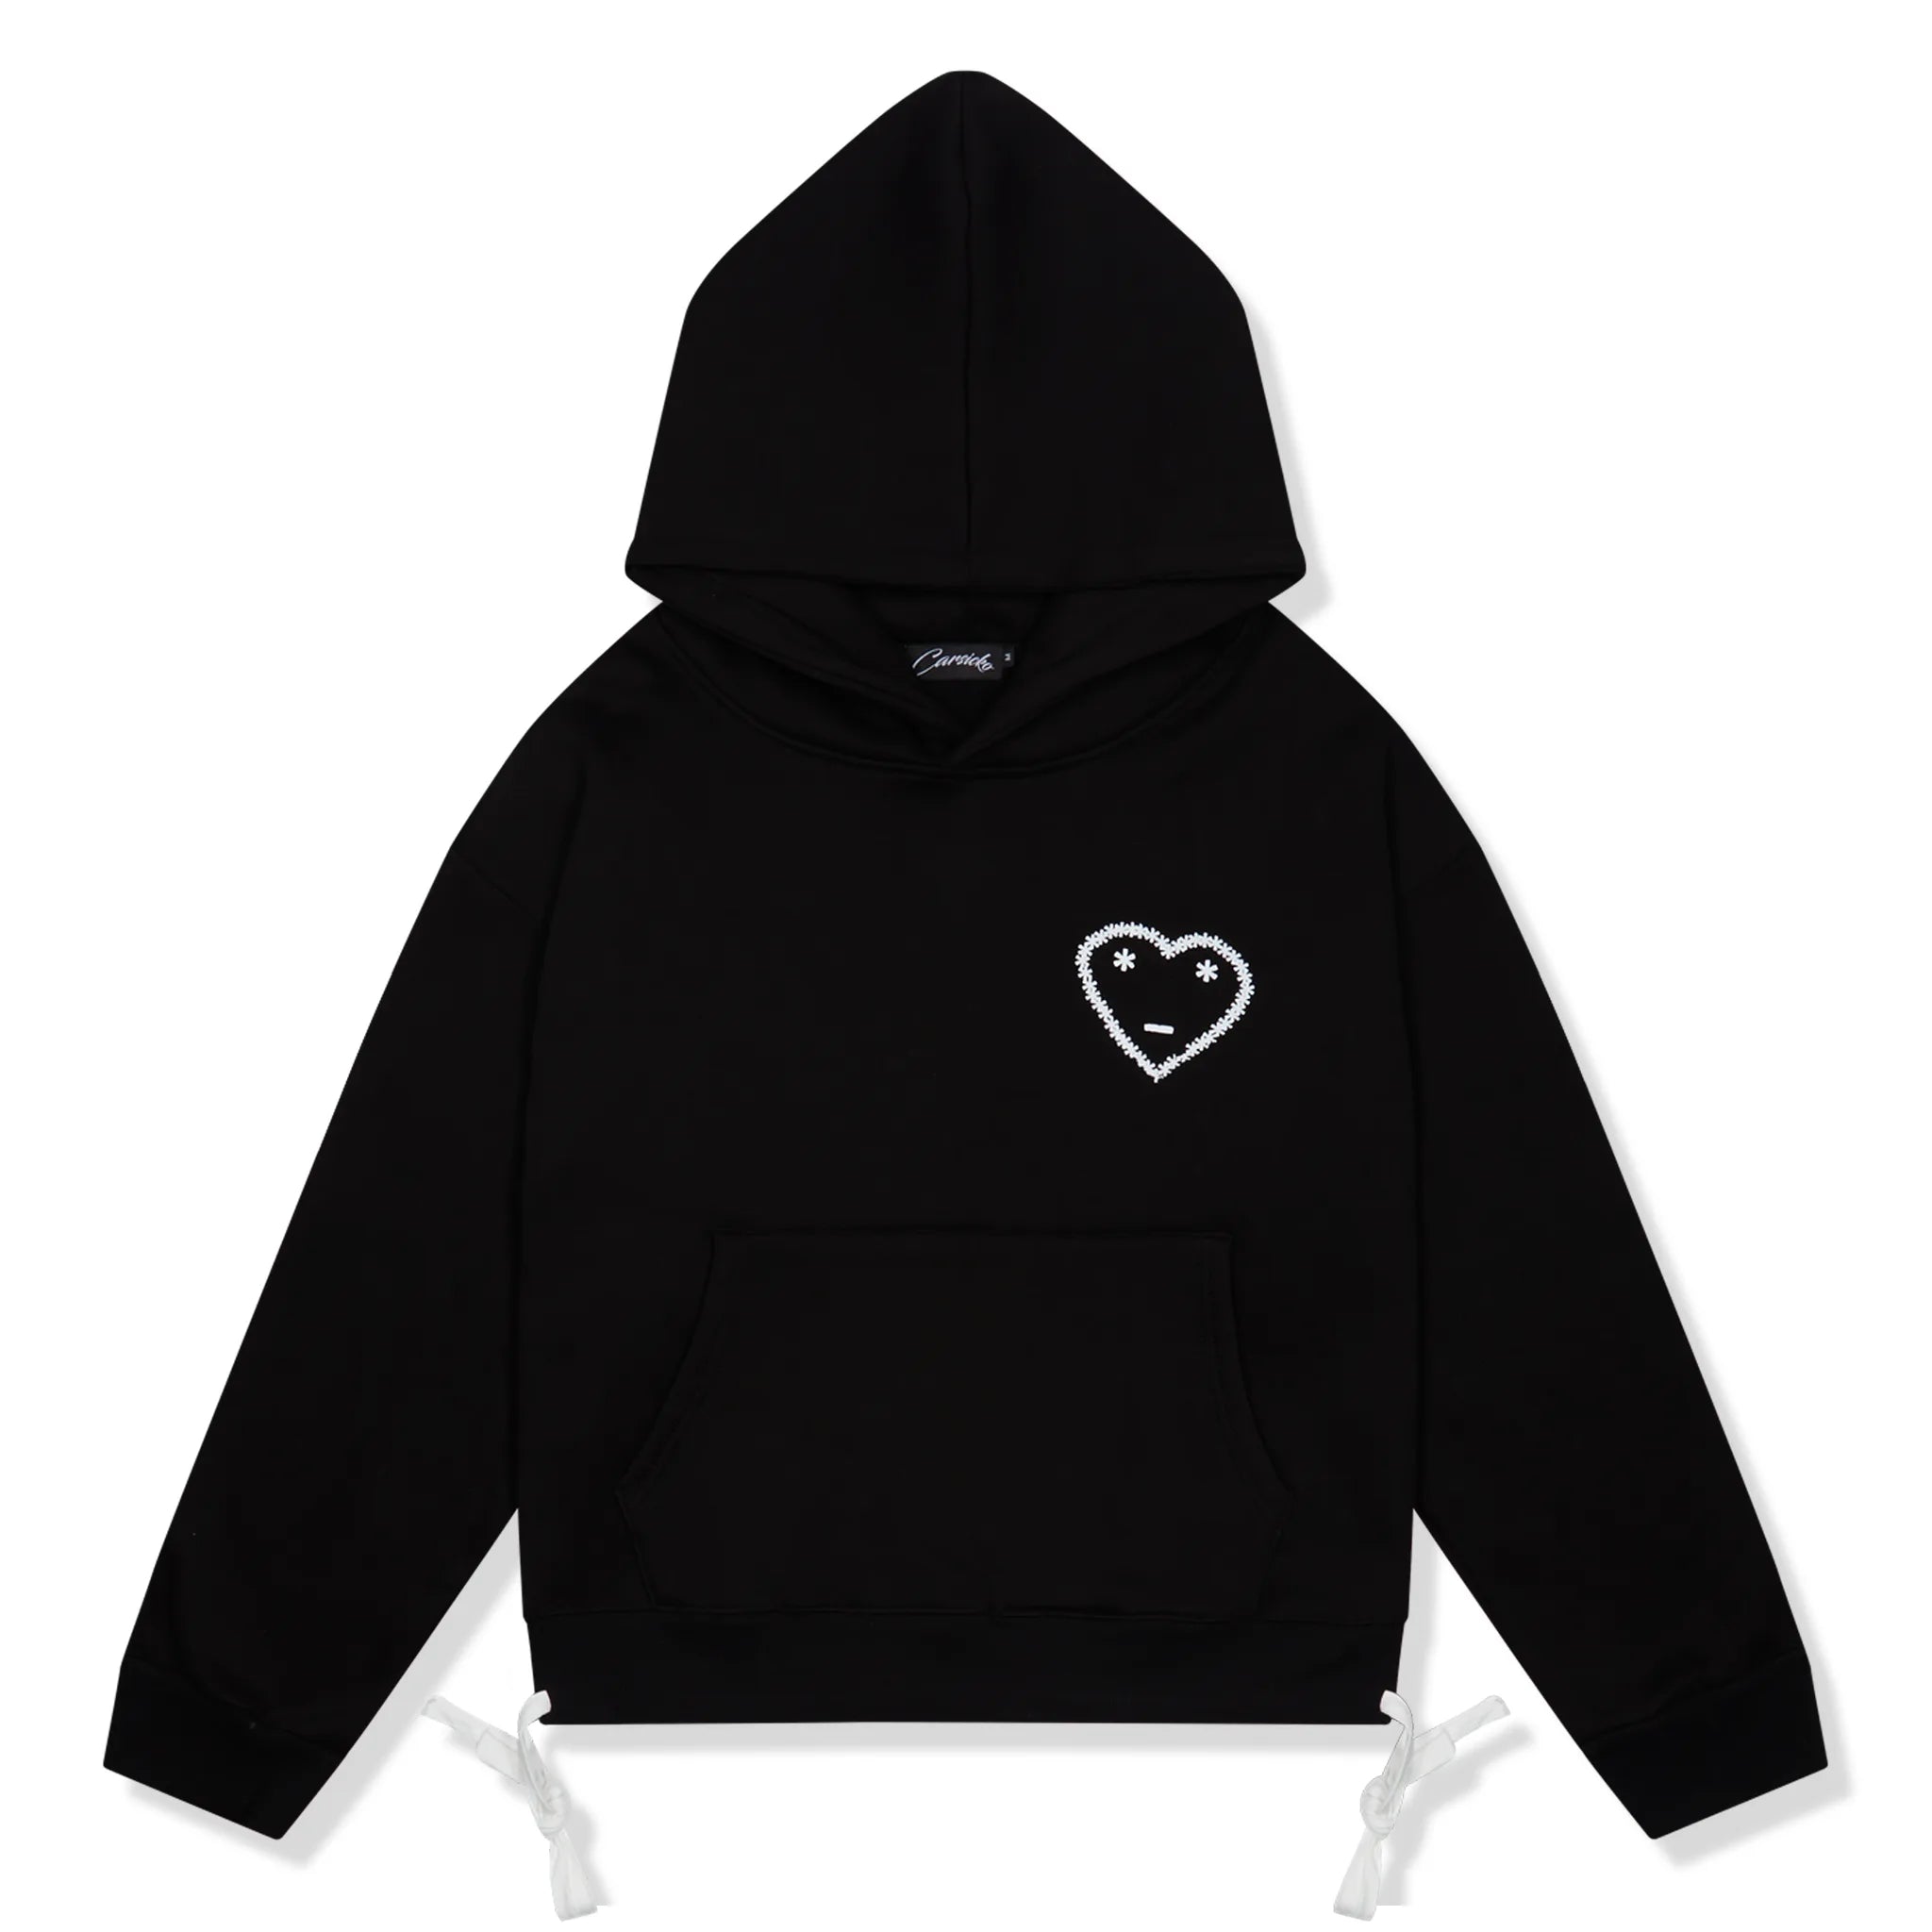 Front view of Carsicko Signature Black Hoodie